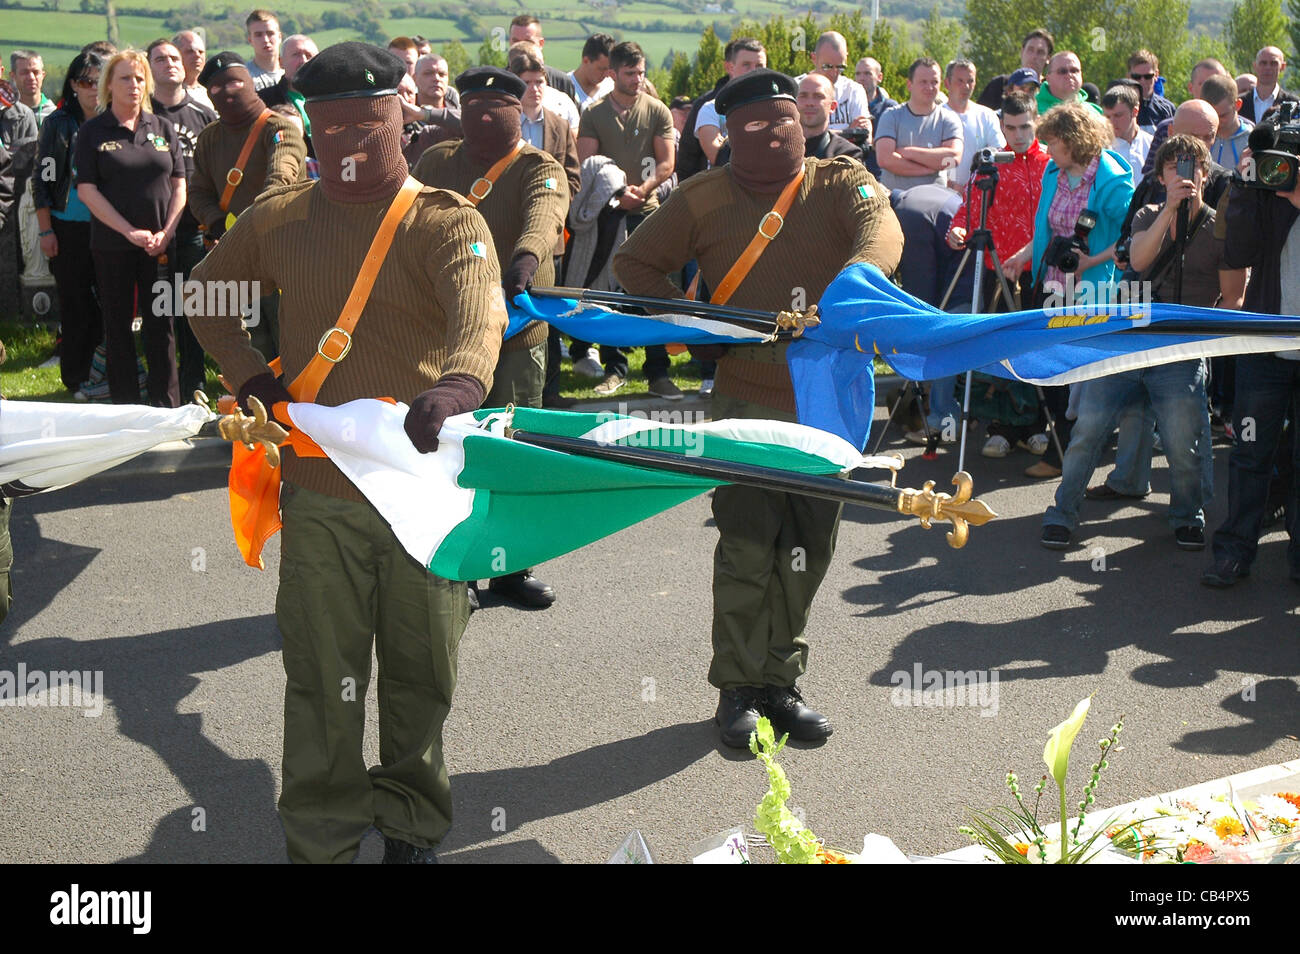 Members of the Real IRA at a 1916 Easter Rising commemoration, Londonderry, Northern Ireland. Stock Photo